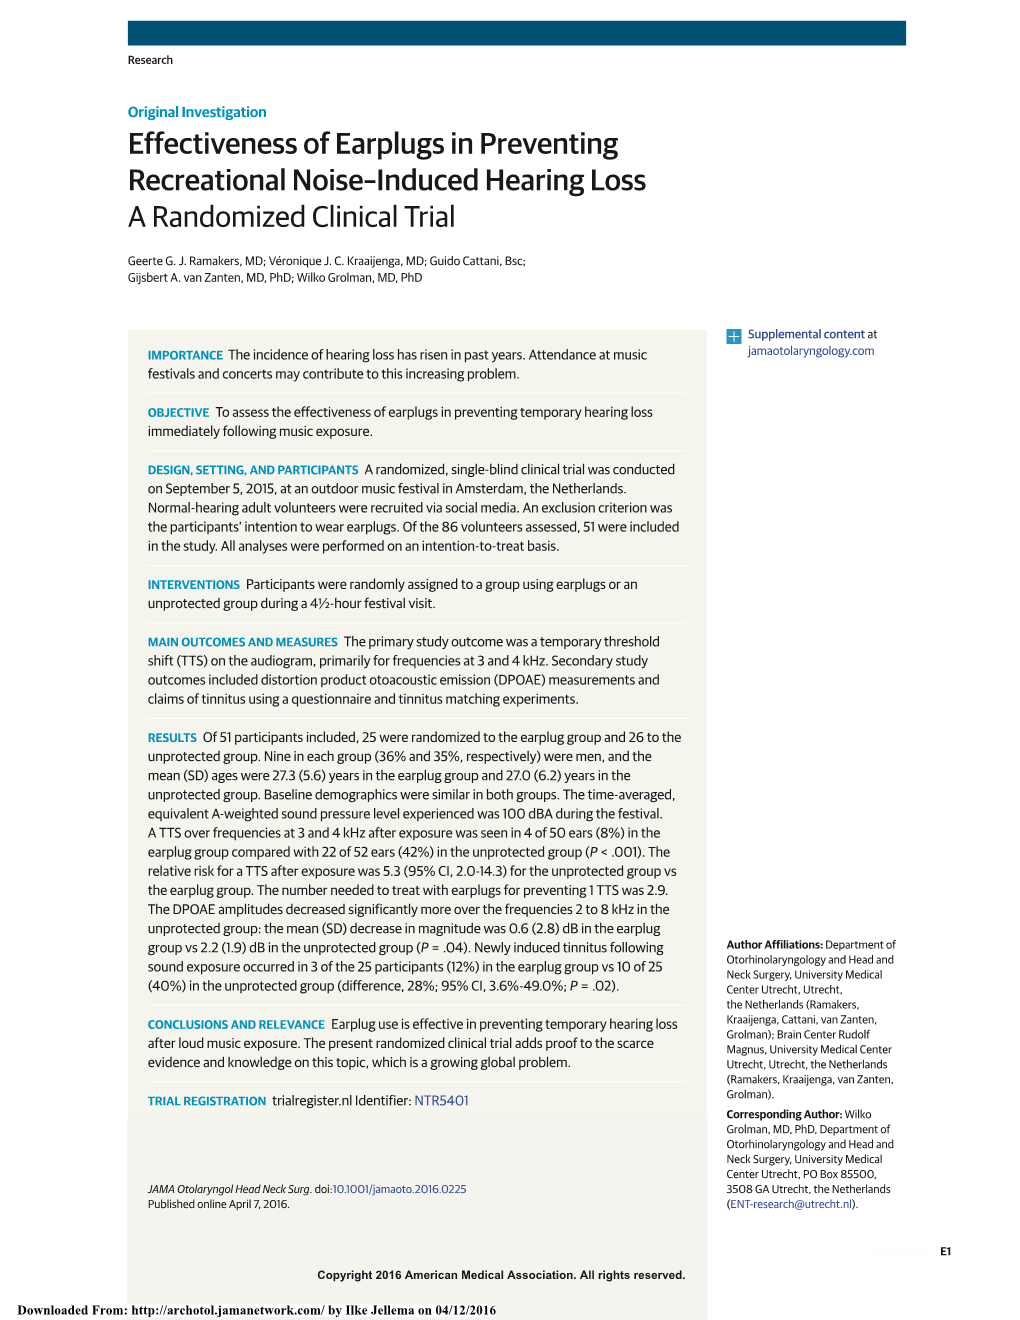 Effectiveness of Earplugs in Preventing Recreational Noise–Induced Hearing Loss: a Randomized Clinical Trial